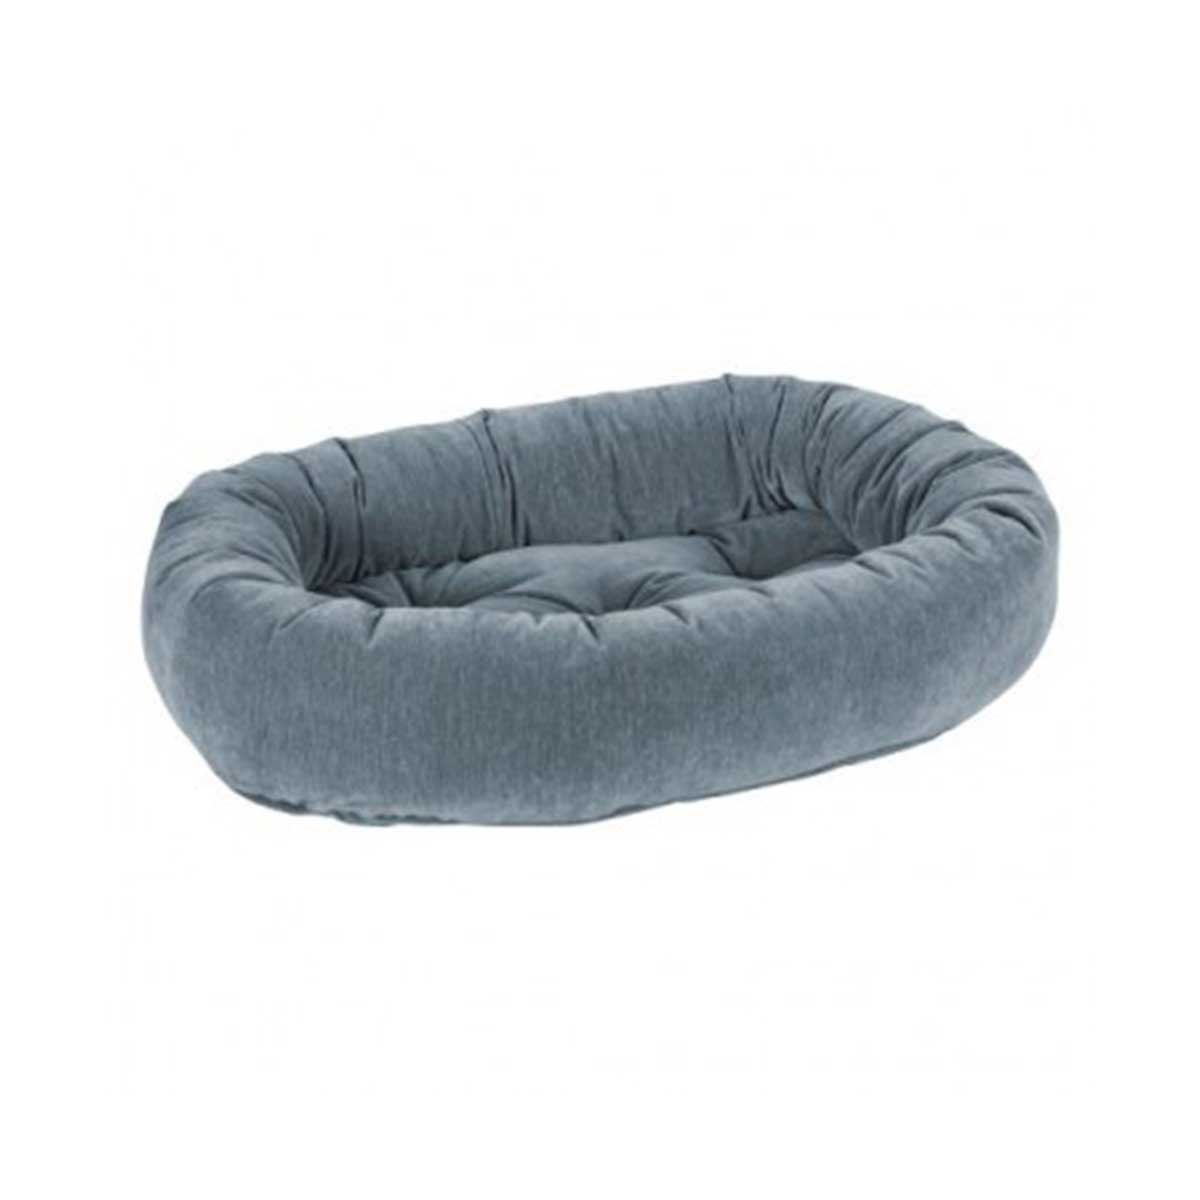 Donut Bed Mineral Microvelvet Pet Bed | Pawlicious & Company